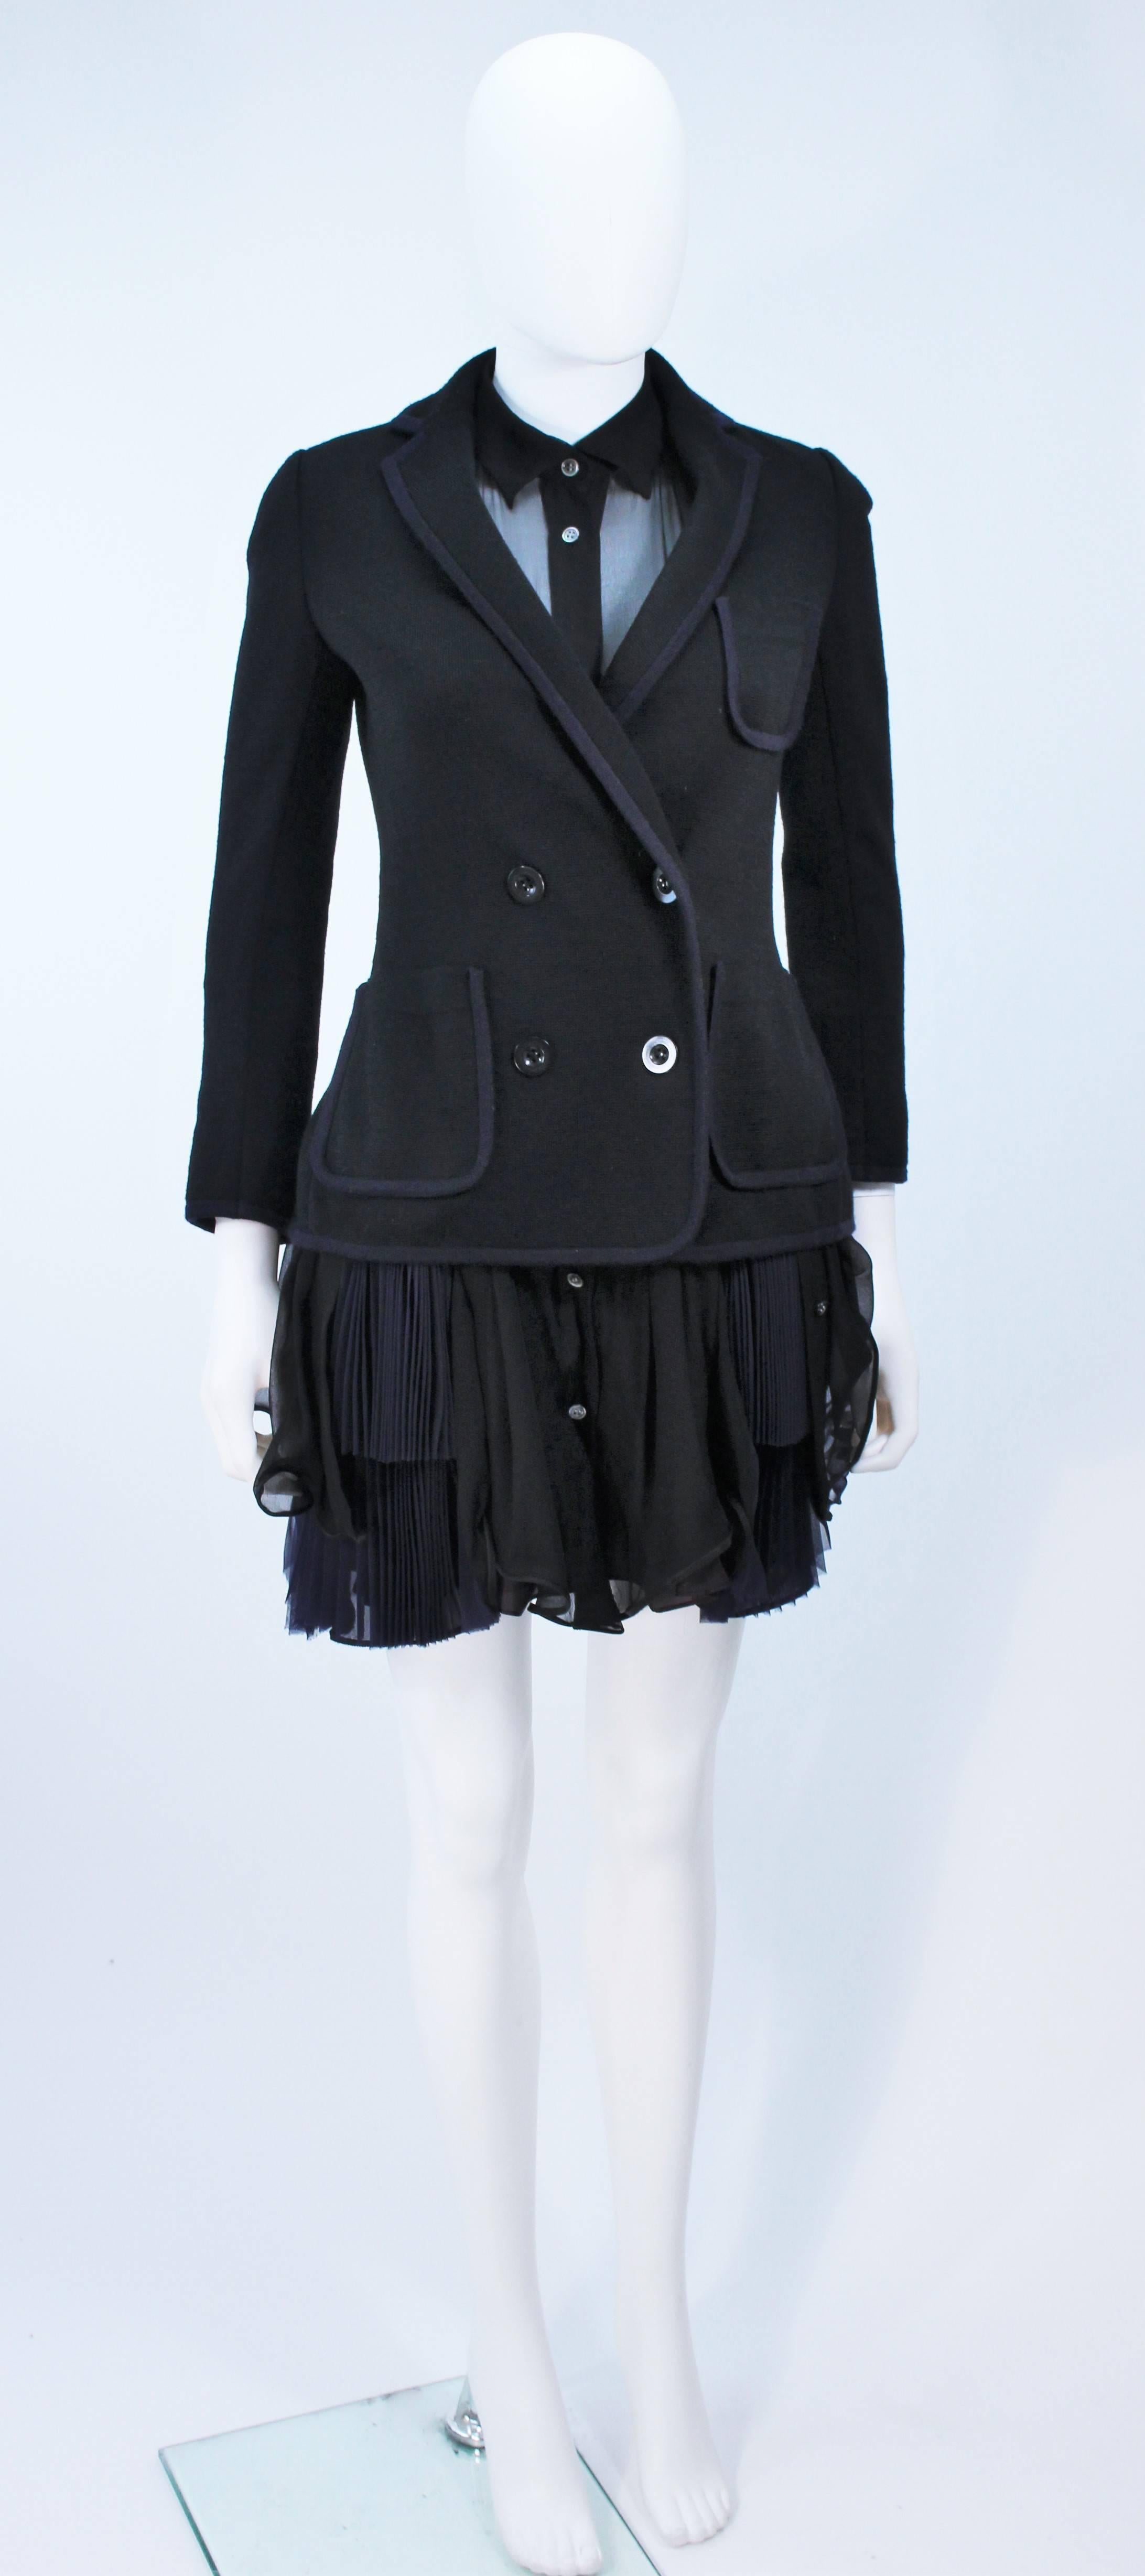  This Comme Des Garcon ensemble features a stretch double breasted wool jacket and chiffon dress. The dress has center front button closures and a hip gathering detail. The two pieces are attachable thru buttons. In new condition, with original